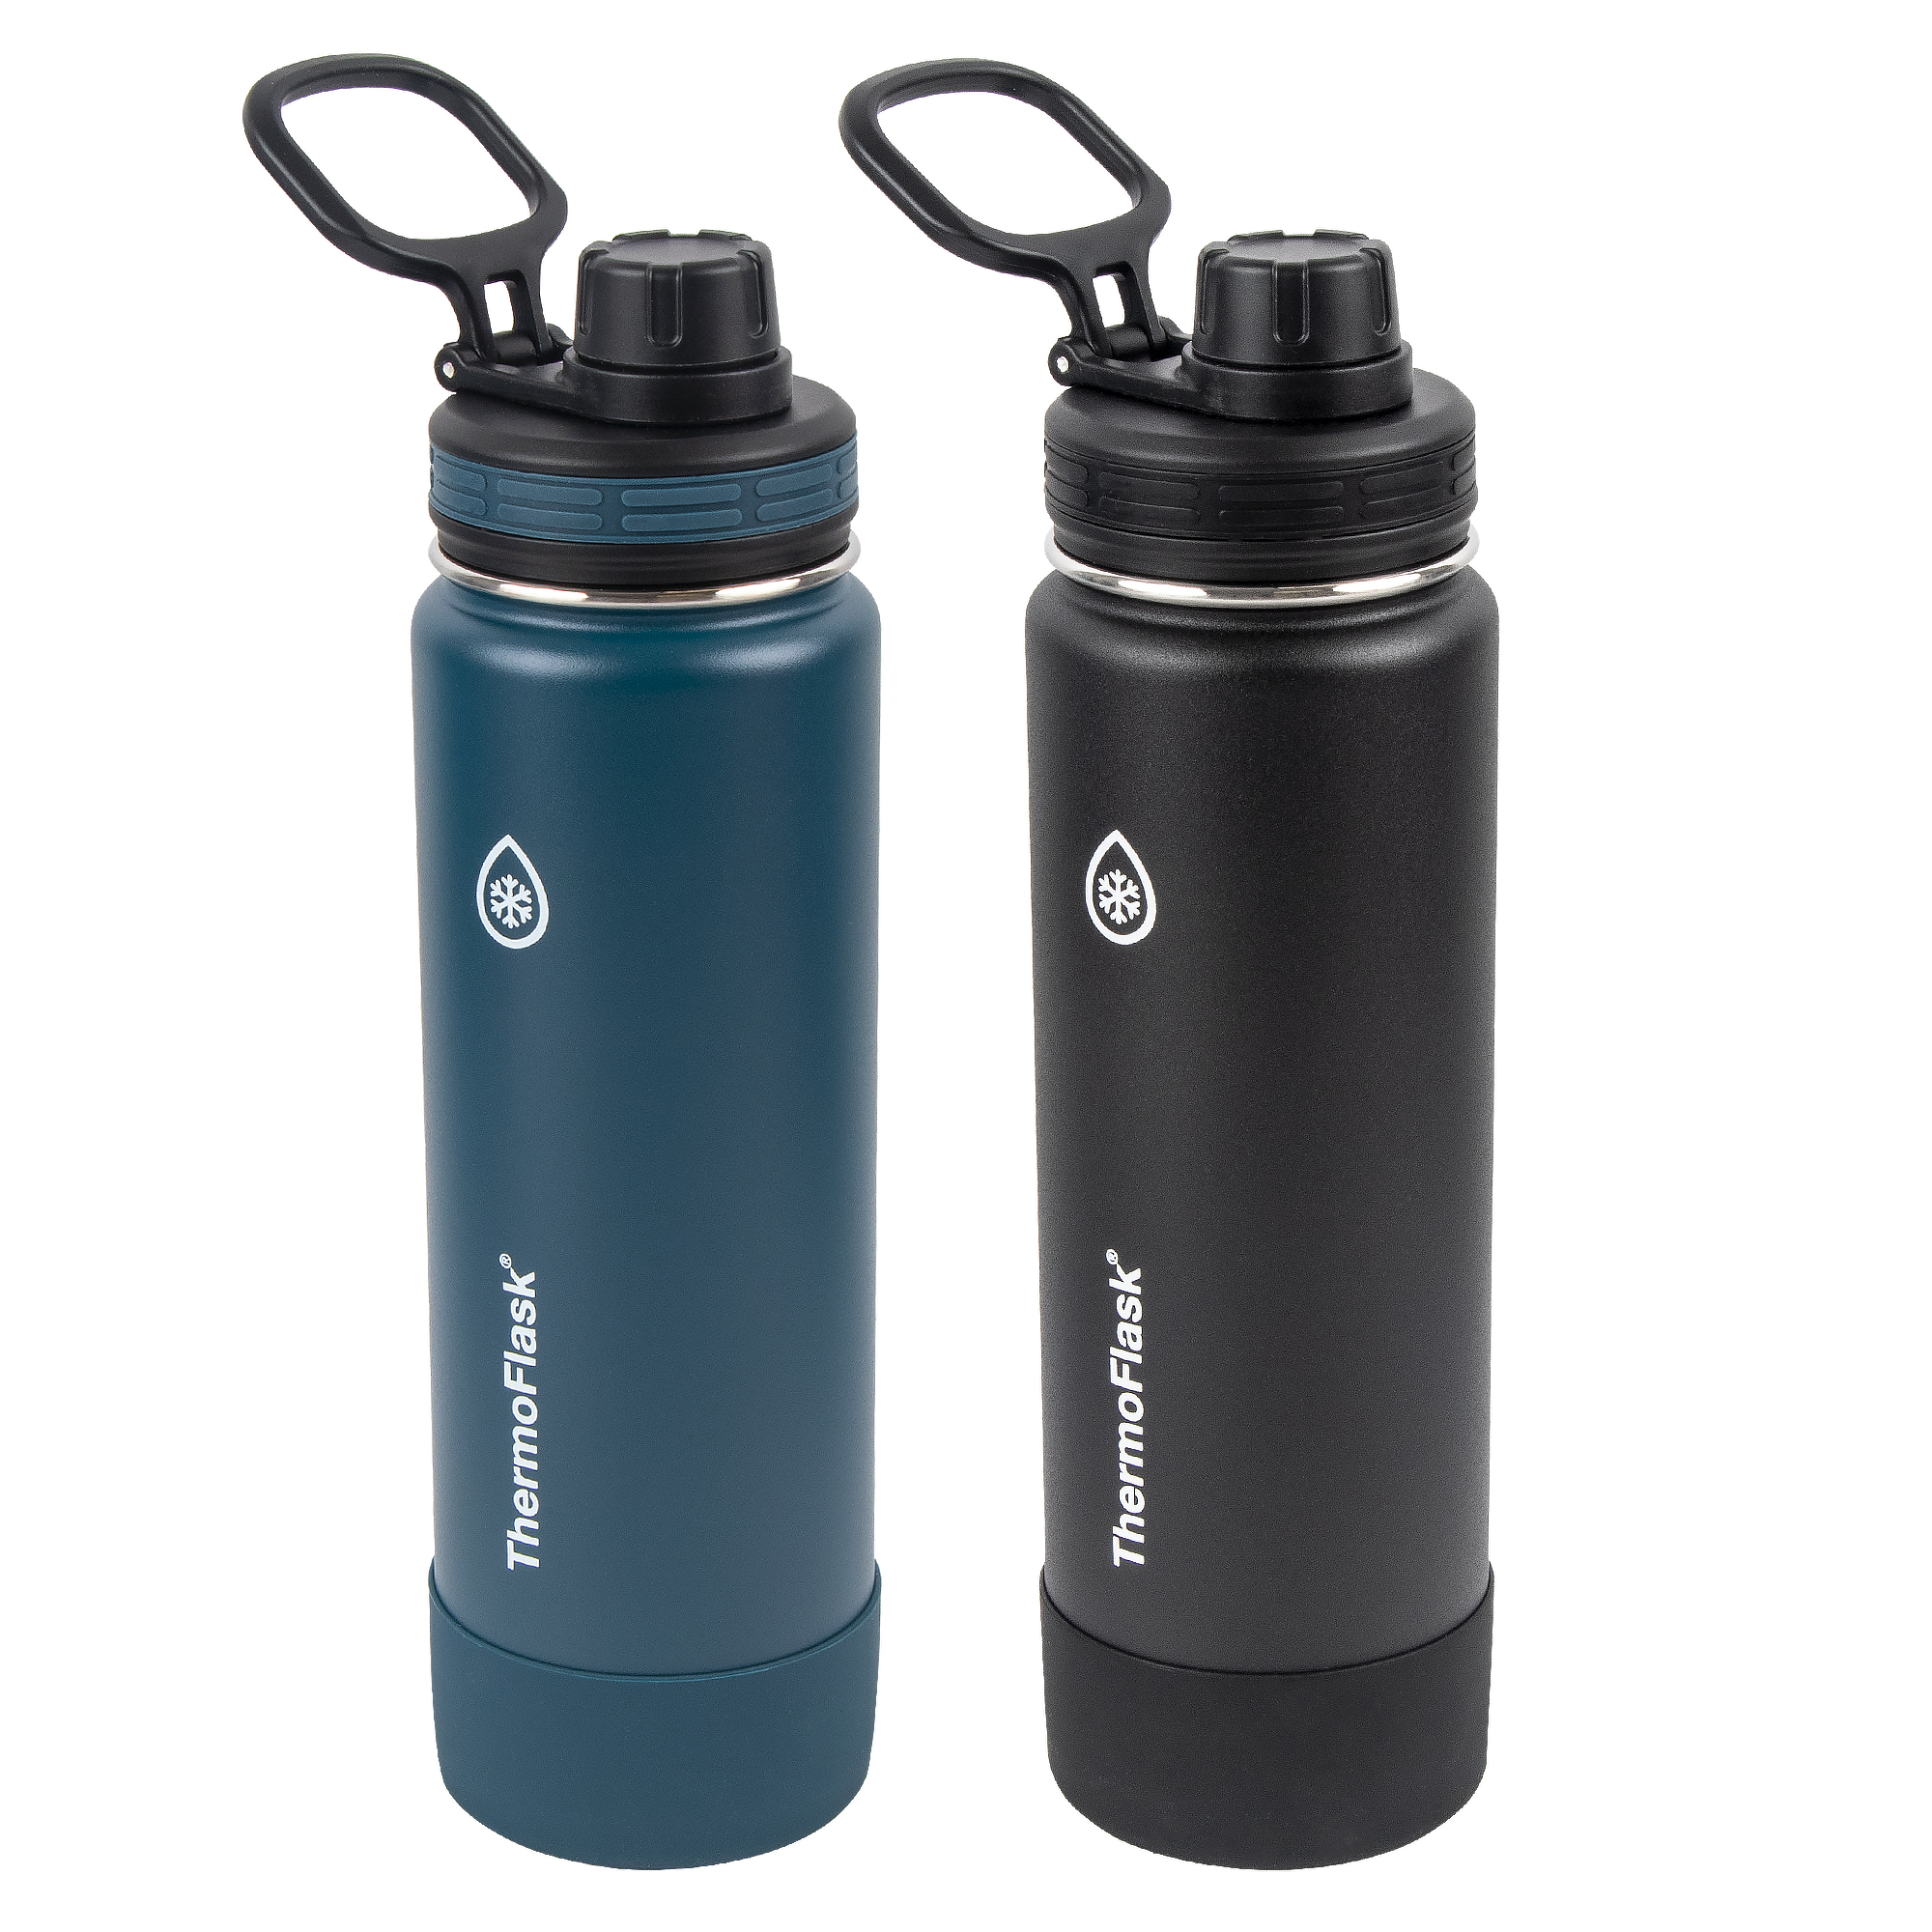 http://mythermoflask.com/cdn/shop/products/1424563-Thermoflask-Spout-24-MayanBlue-Black-FrontAngle.png?v=1655766993